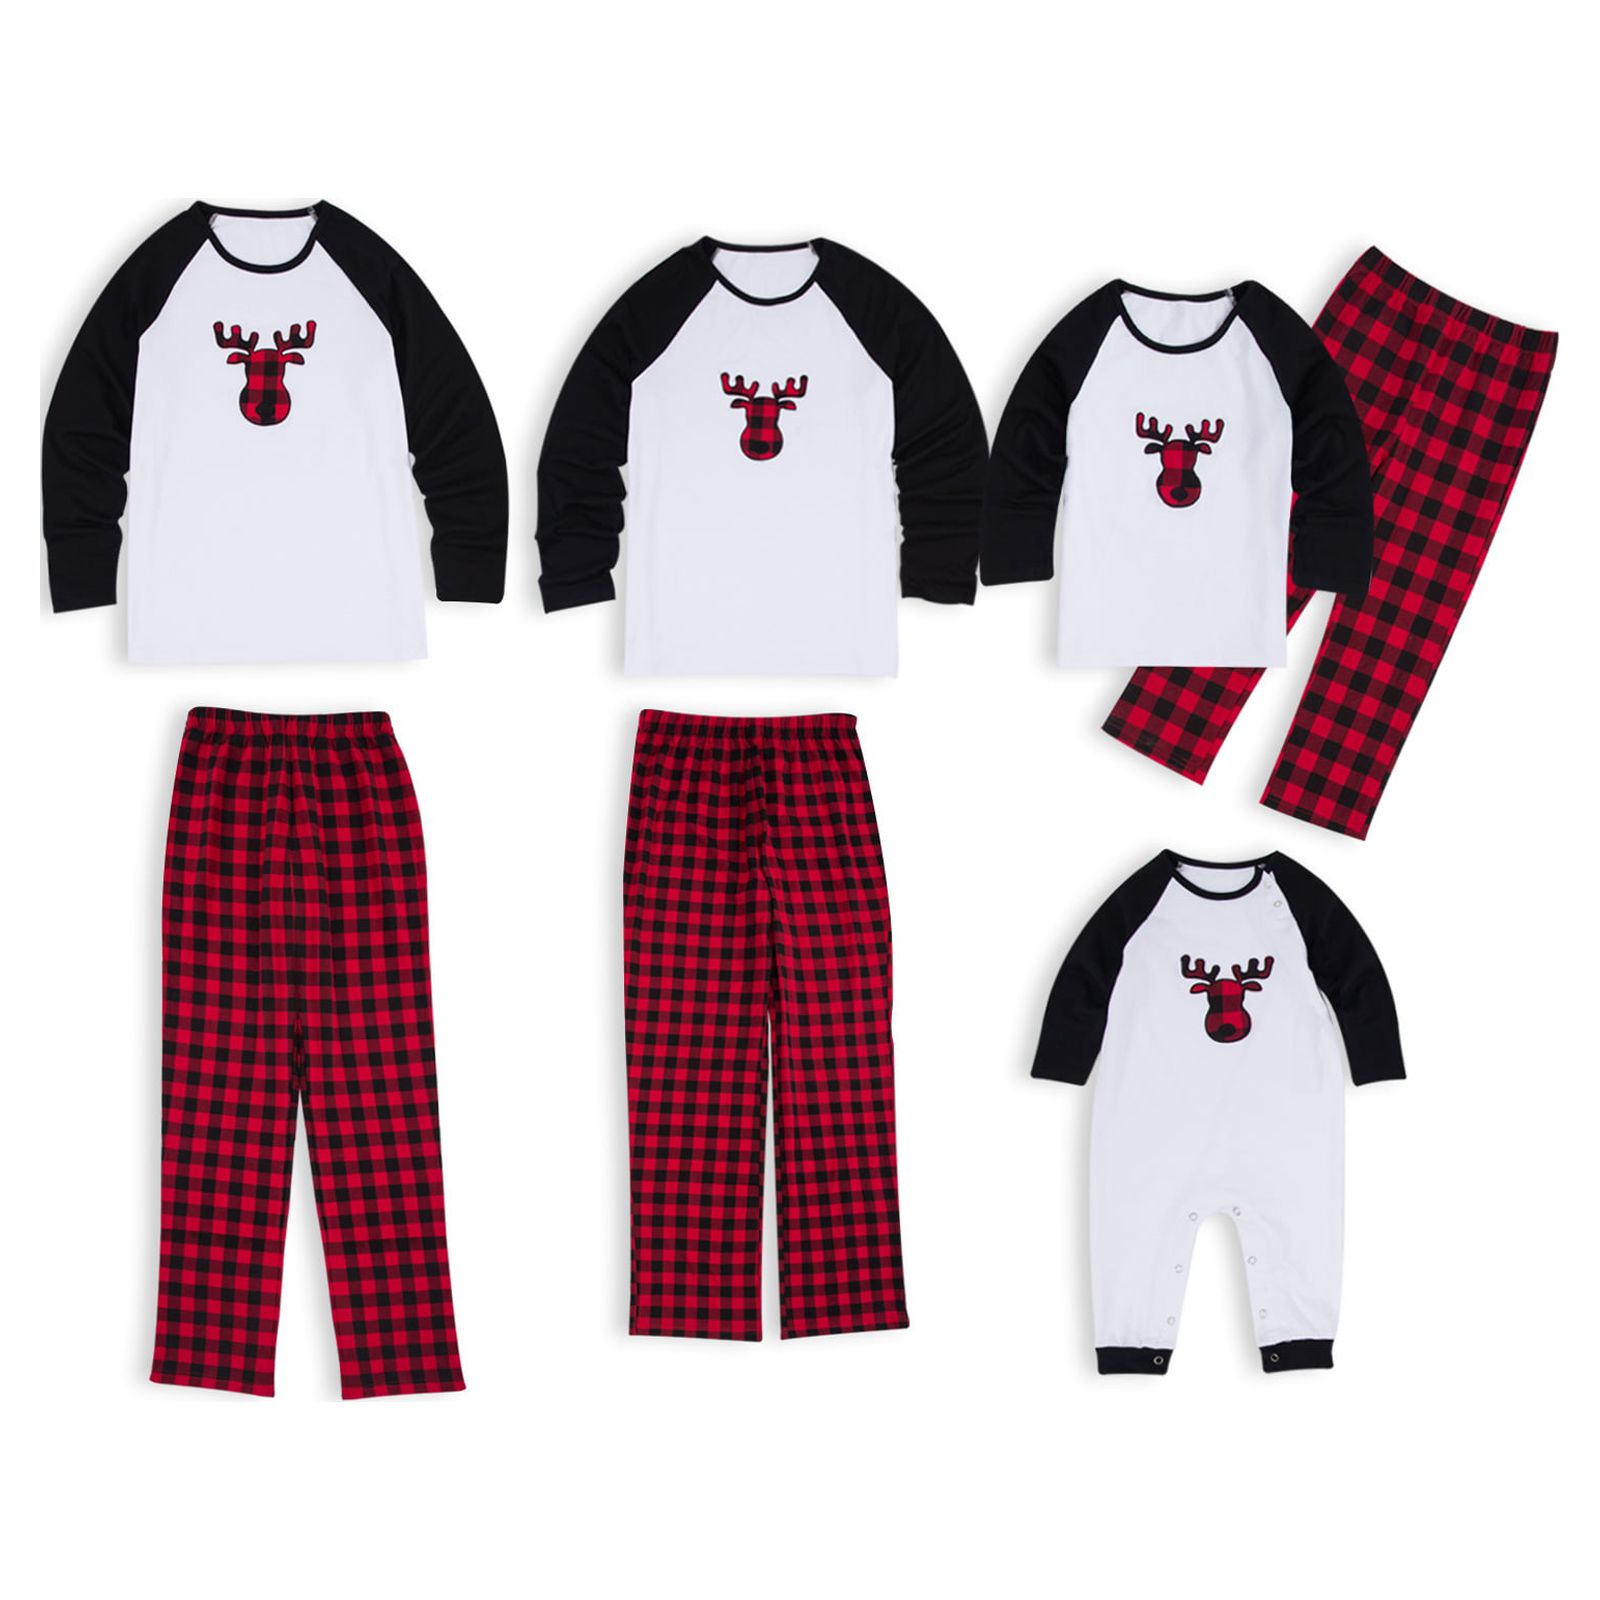 PatPat Black/White Mommy and Me Christmas Plaid Deer Family Matching Pajamas 2-piece,Unisex - image 10 of 12